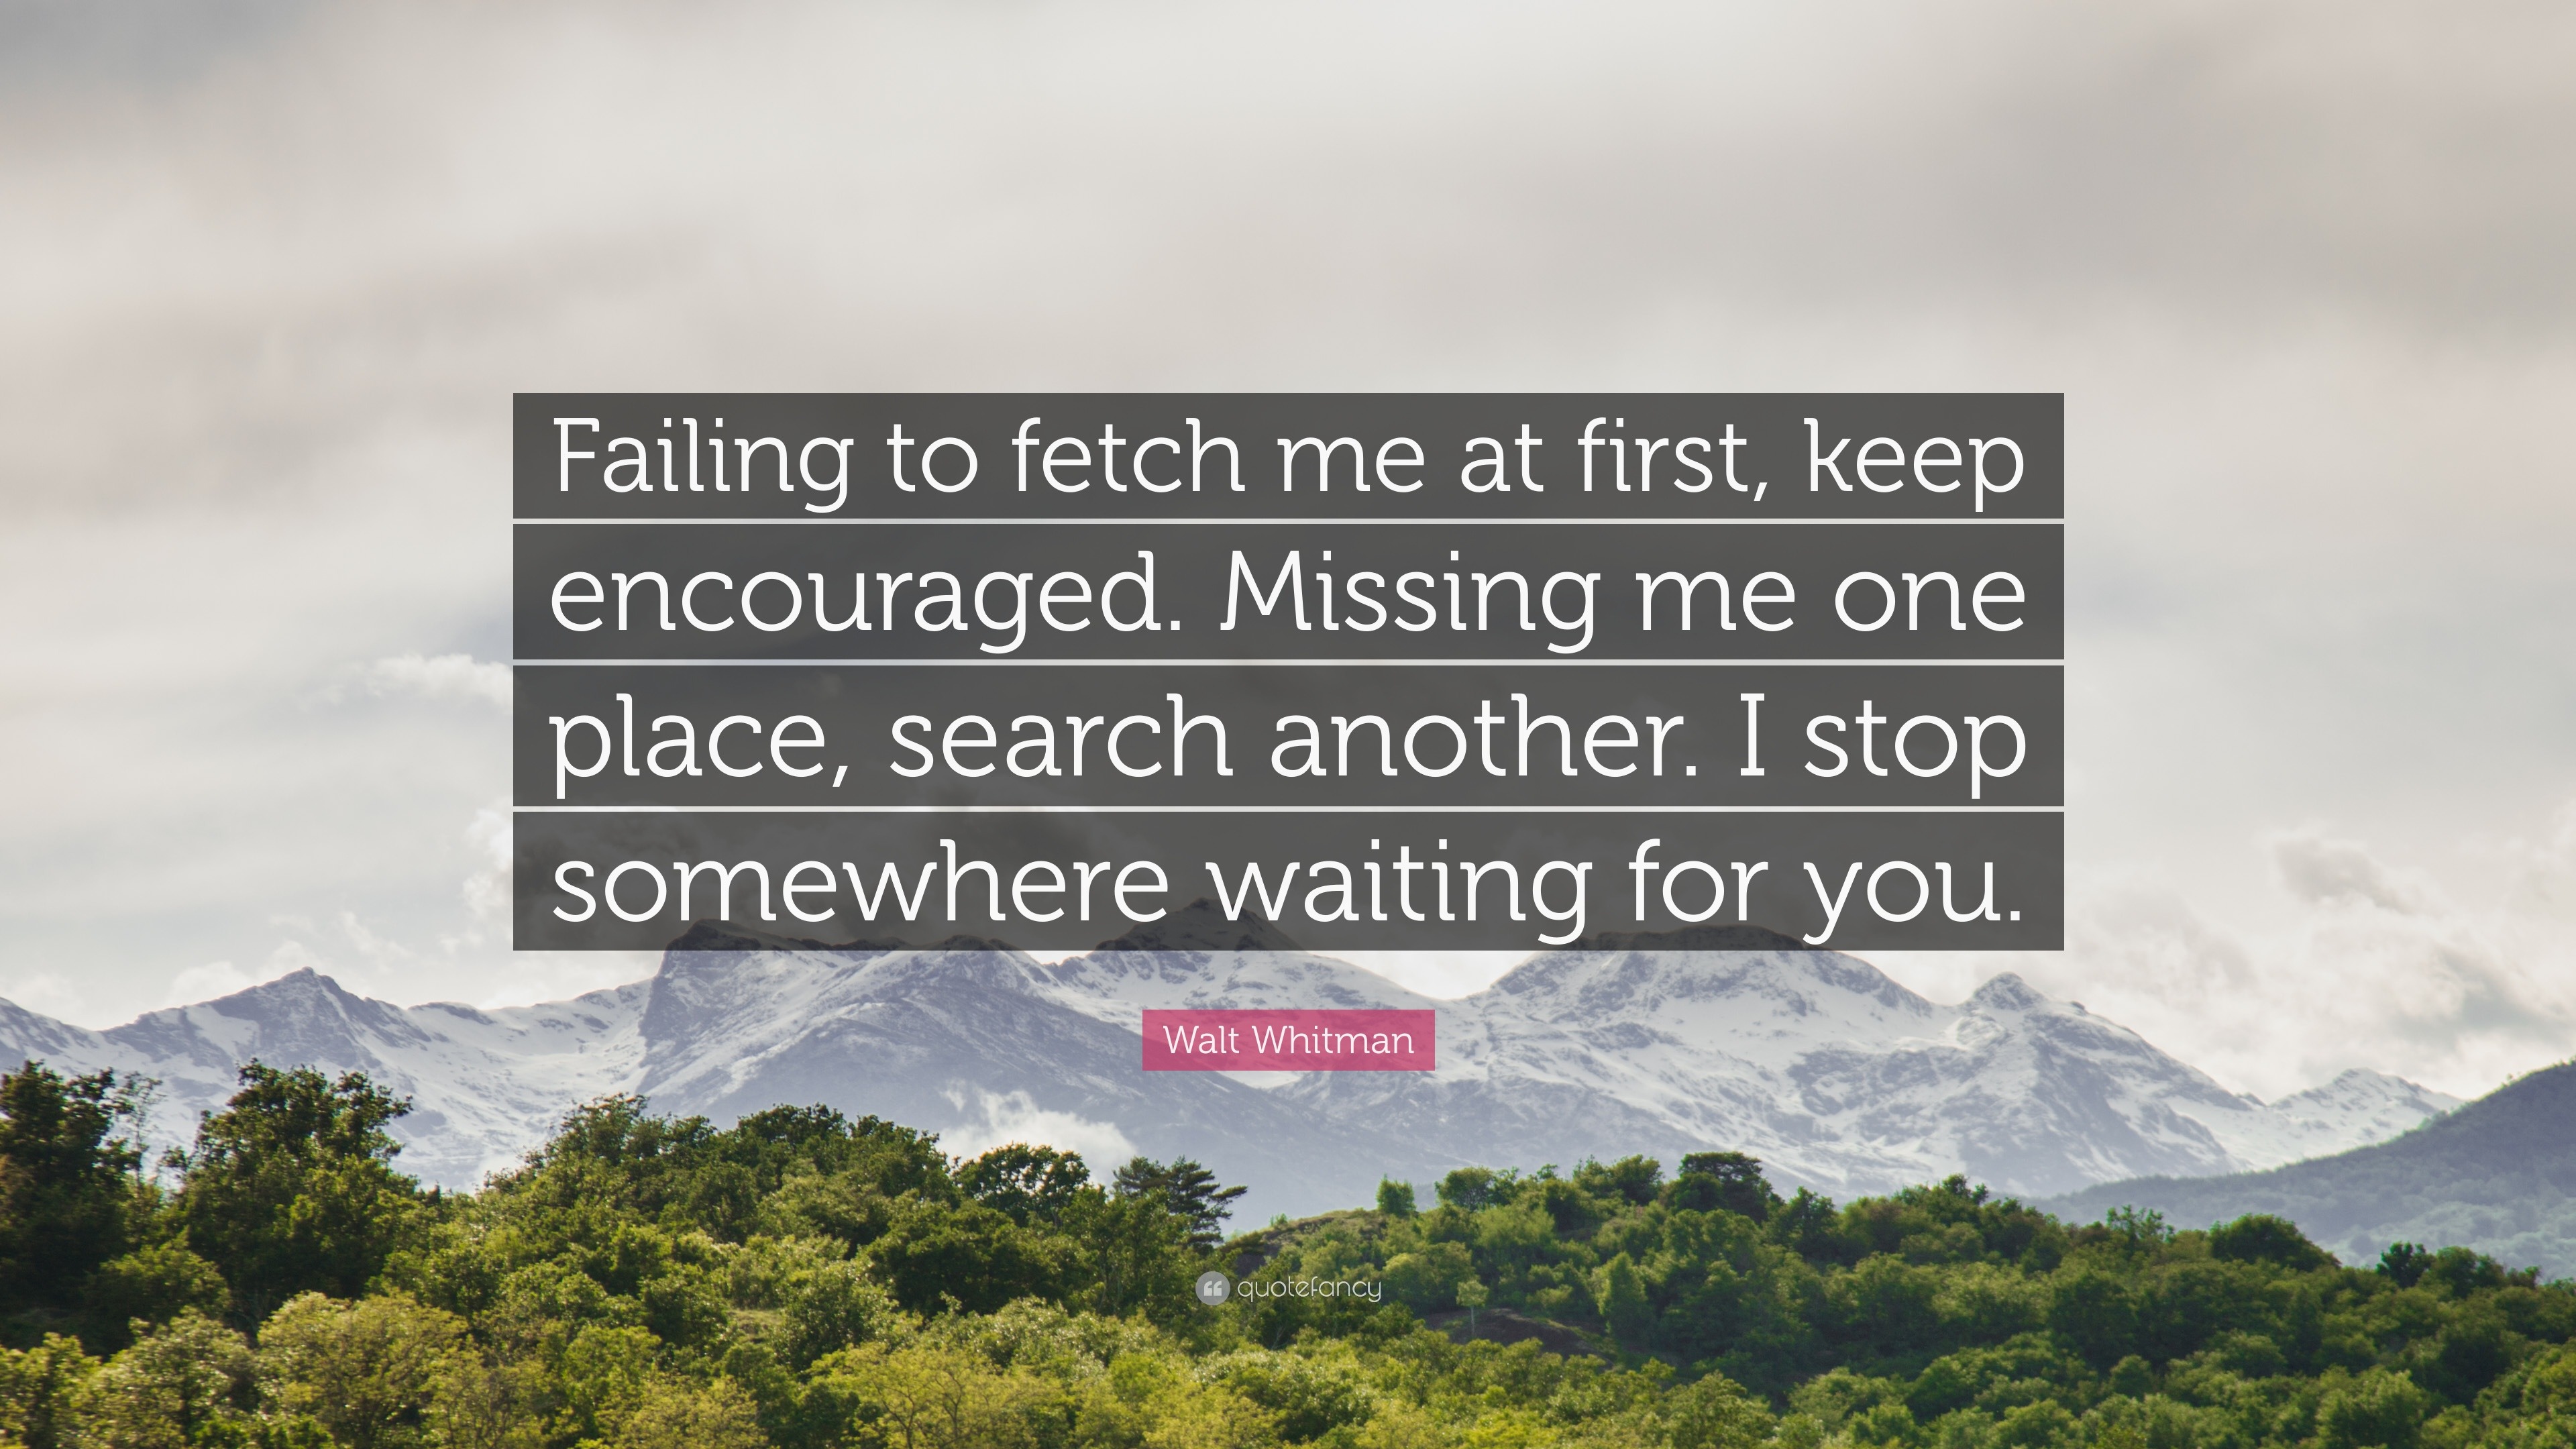 Walt Whitman Quote: “Failing to fetch me at first, keep encouraged. Missing  me one place, search